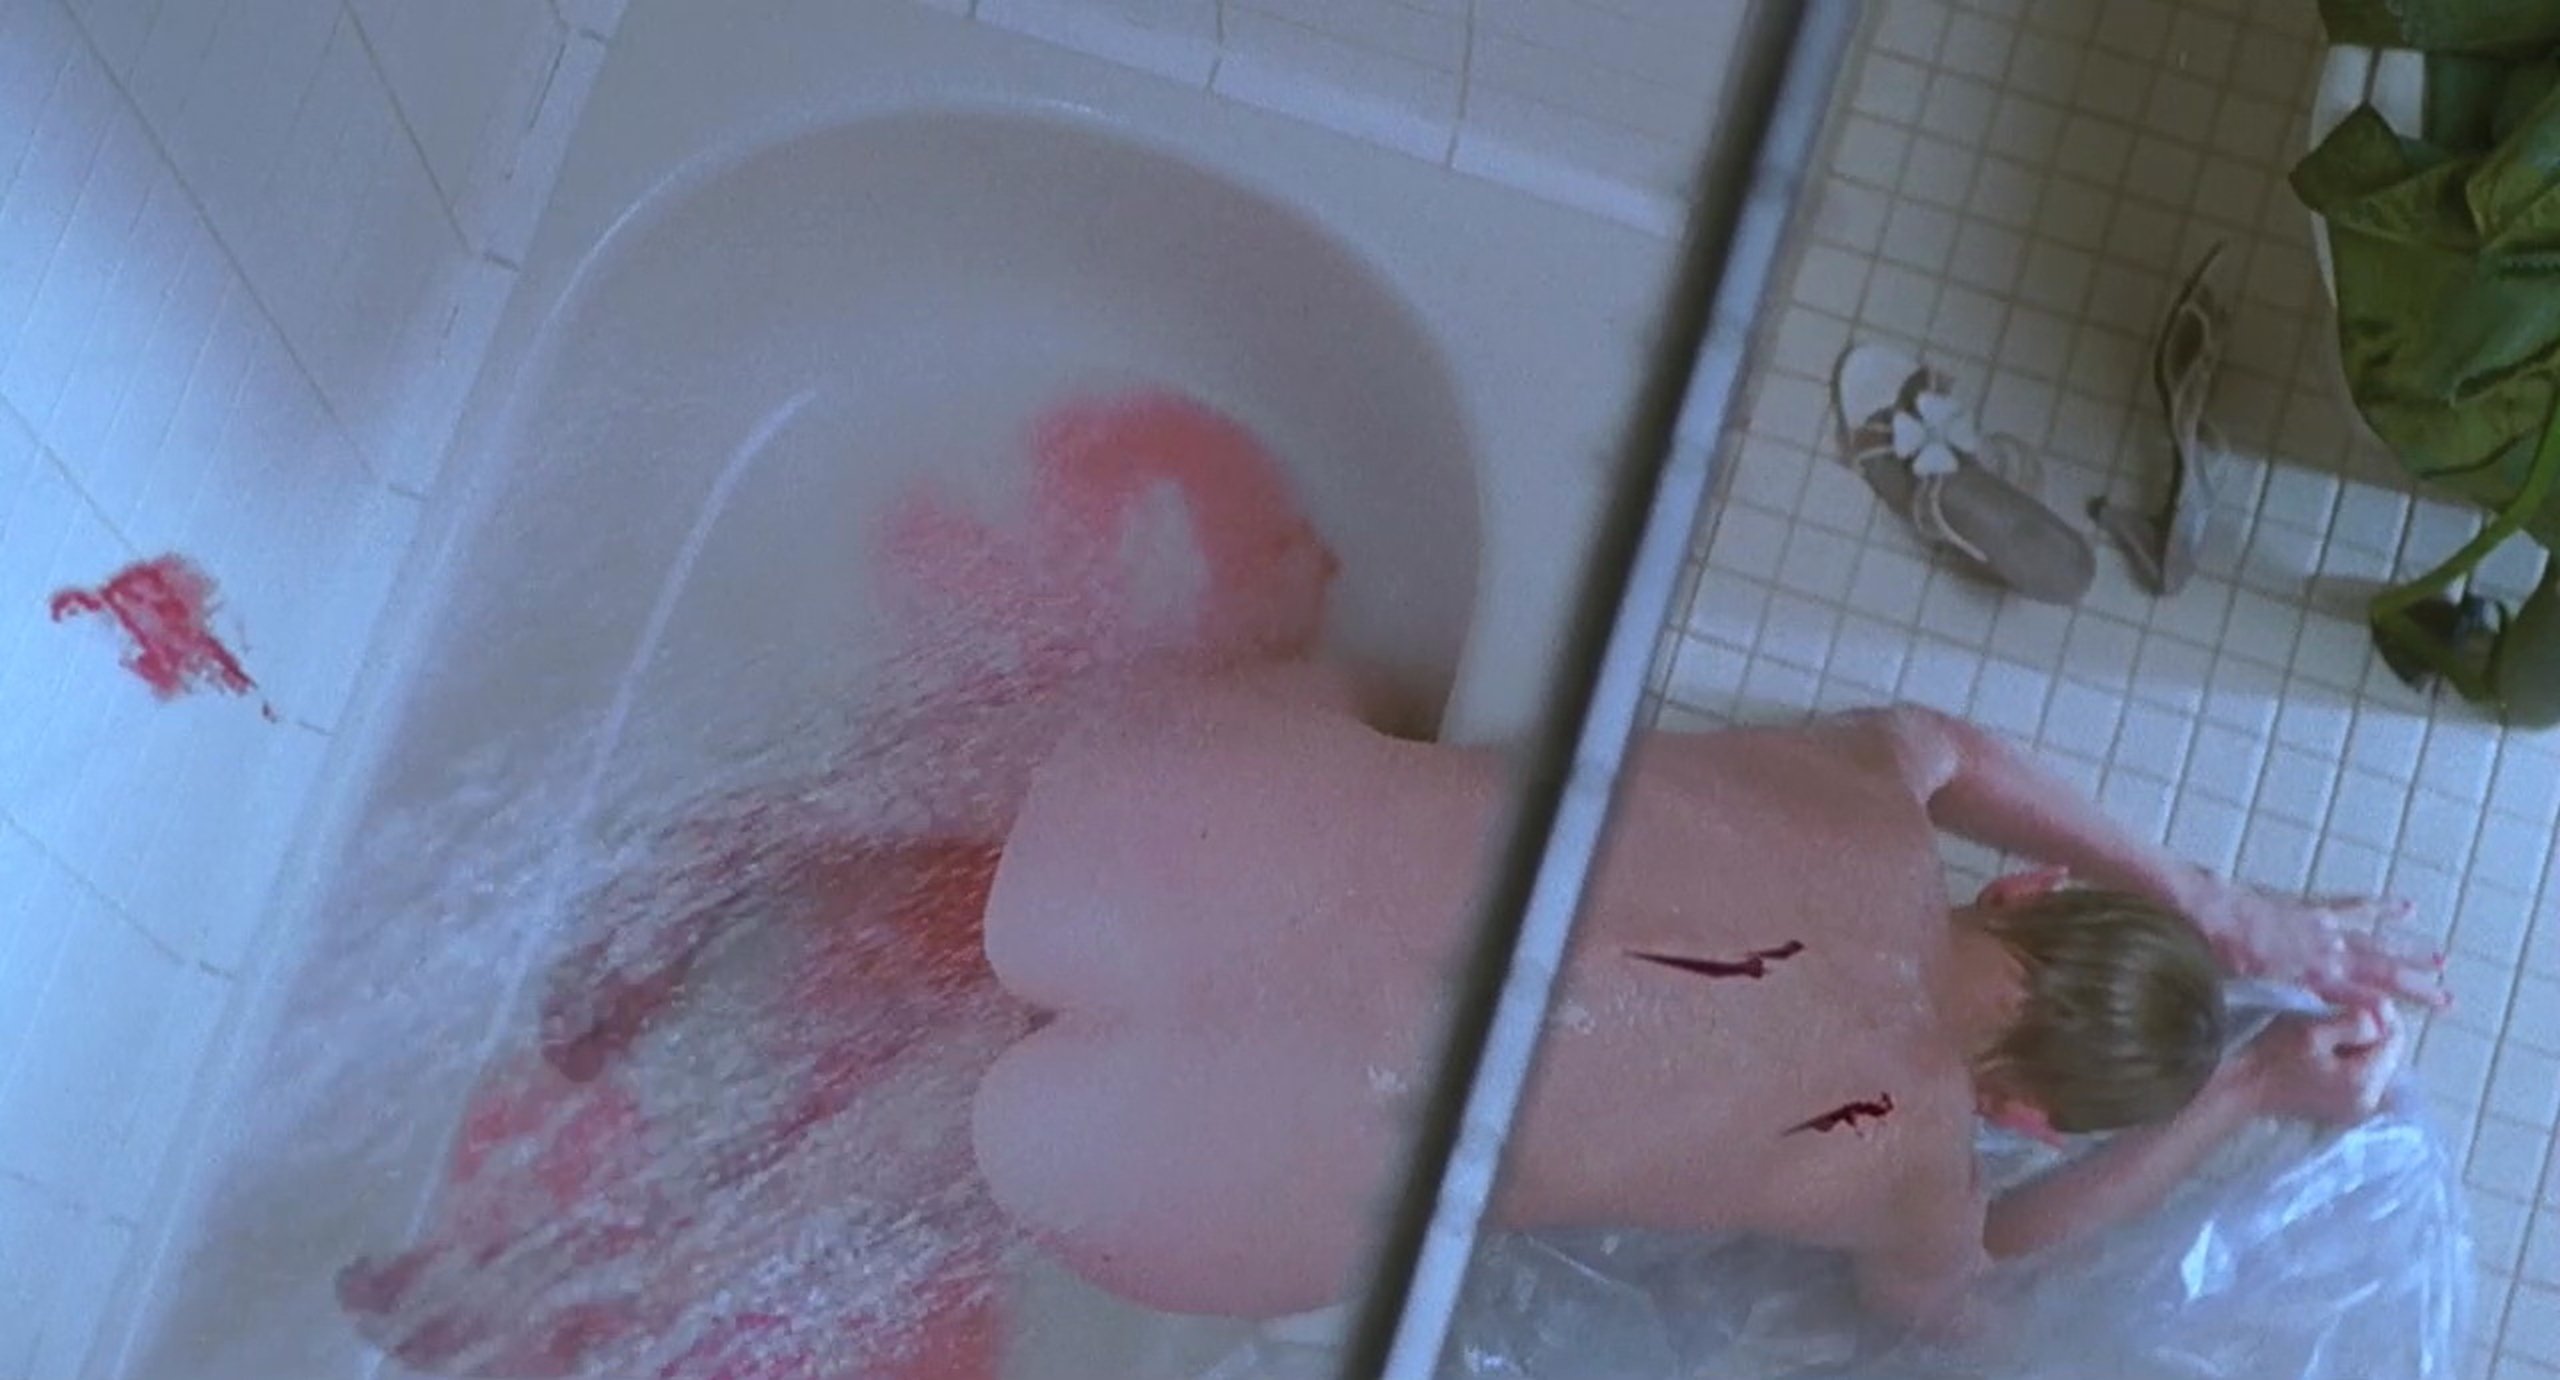 Naked Anne Heche In Psycho